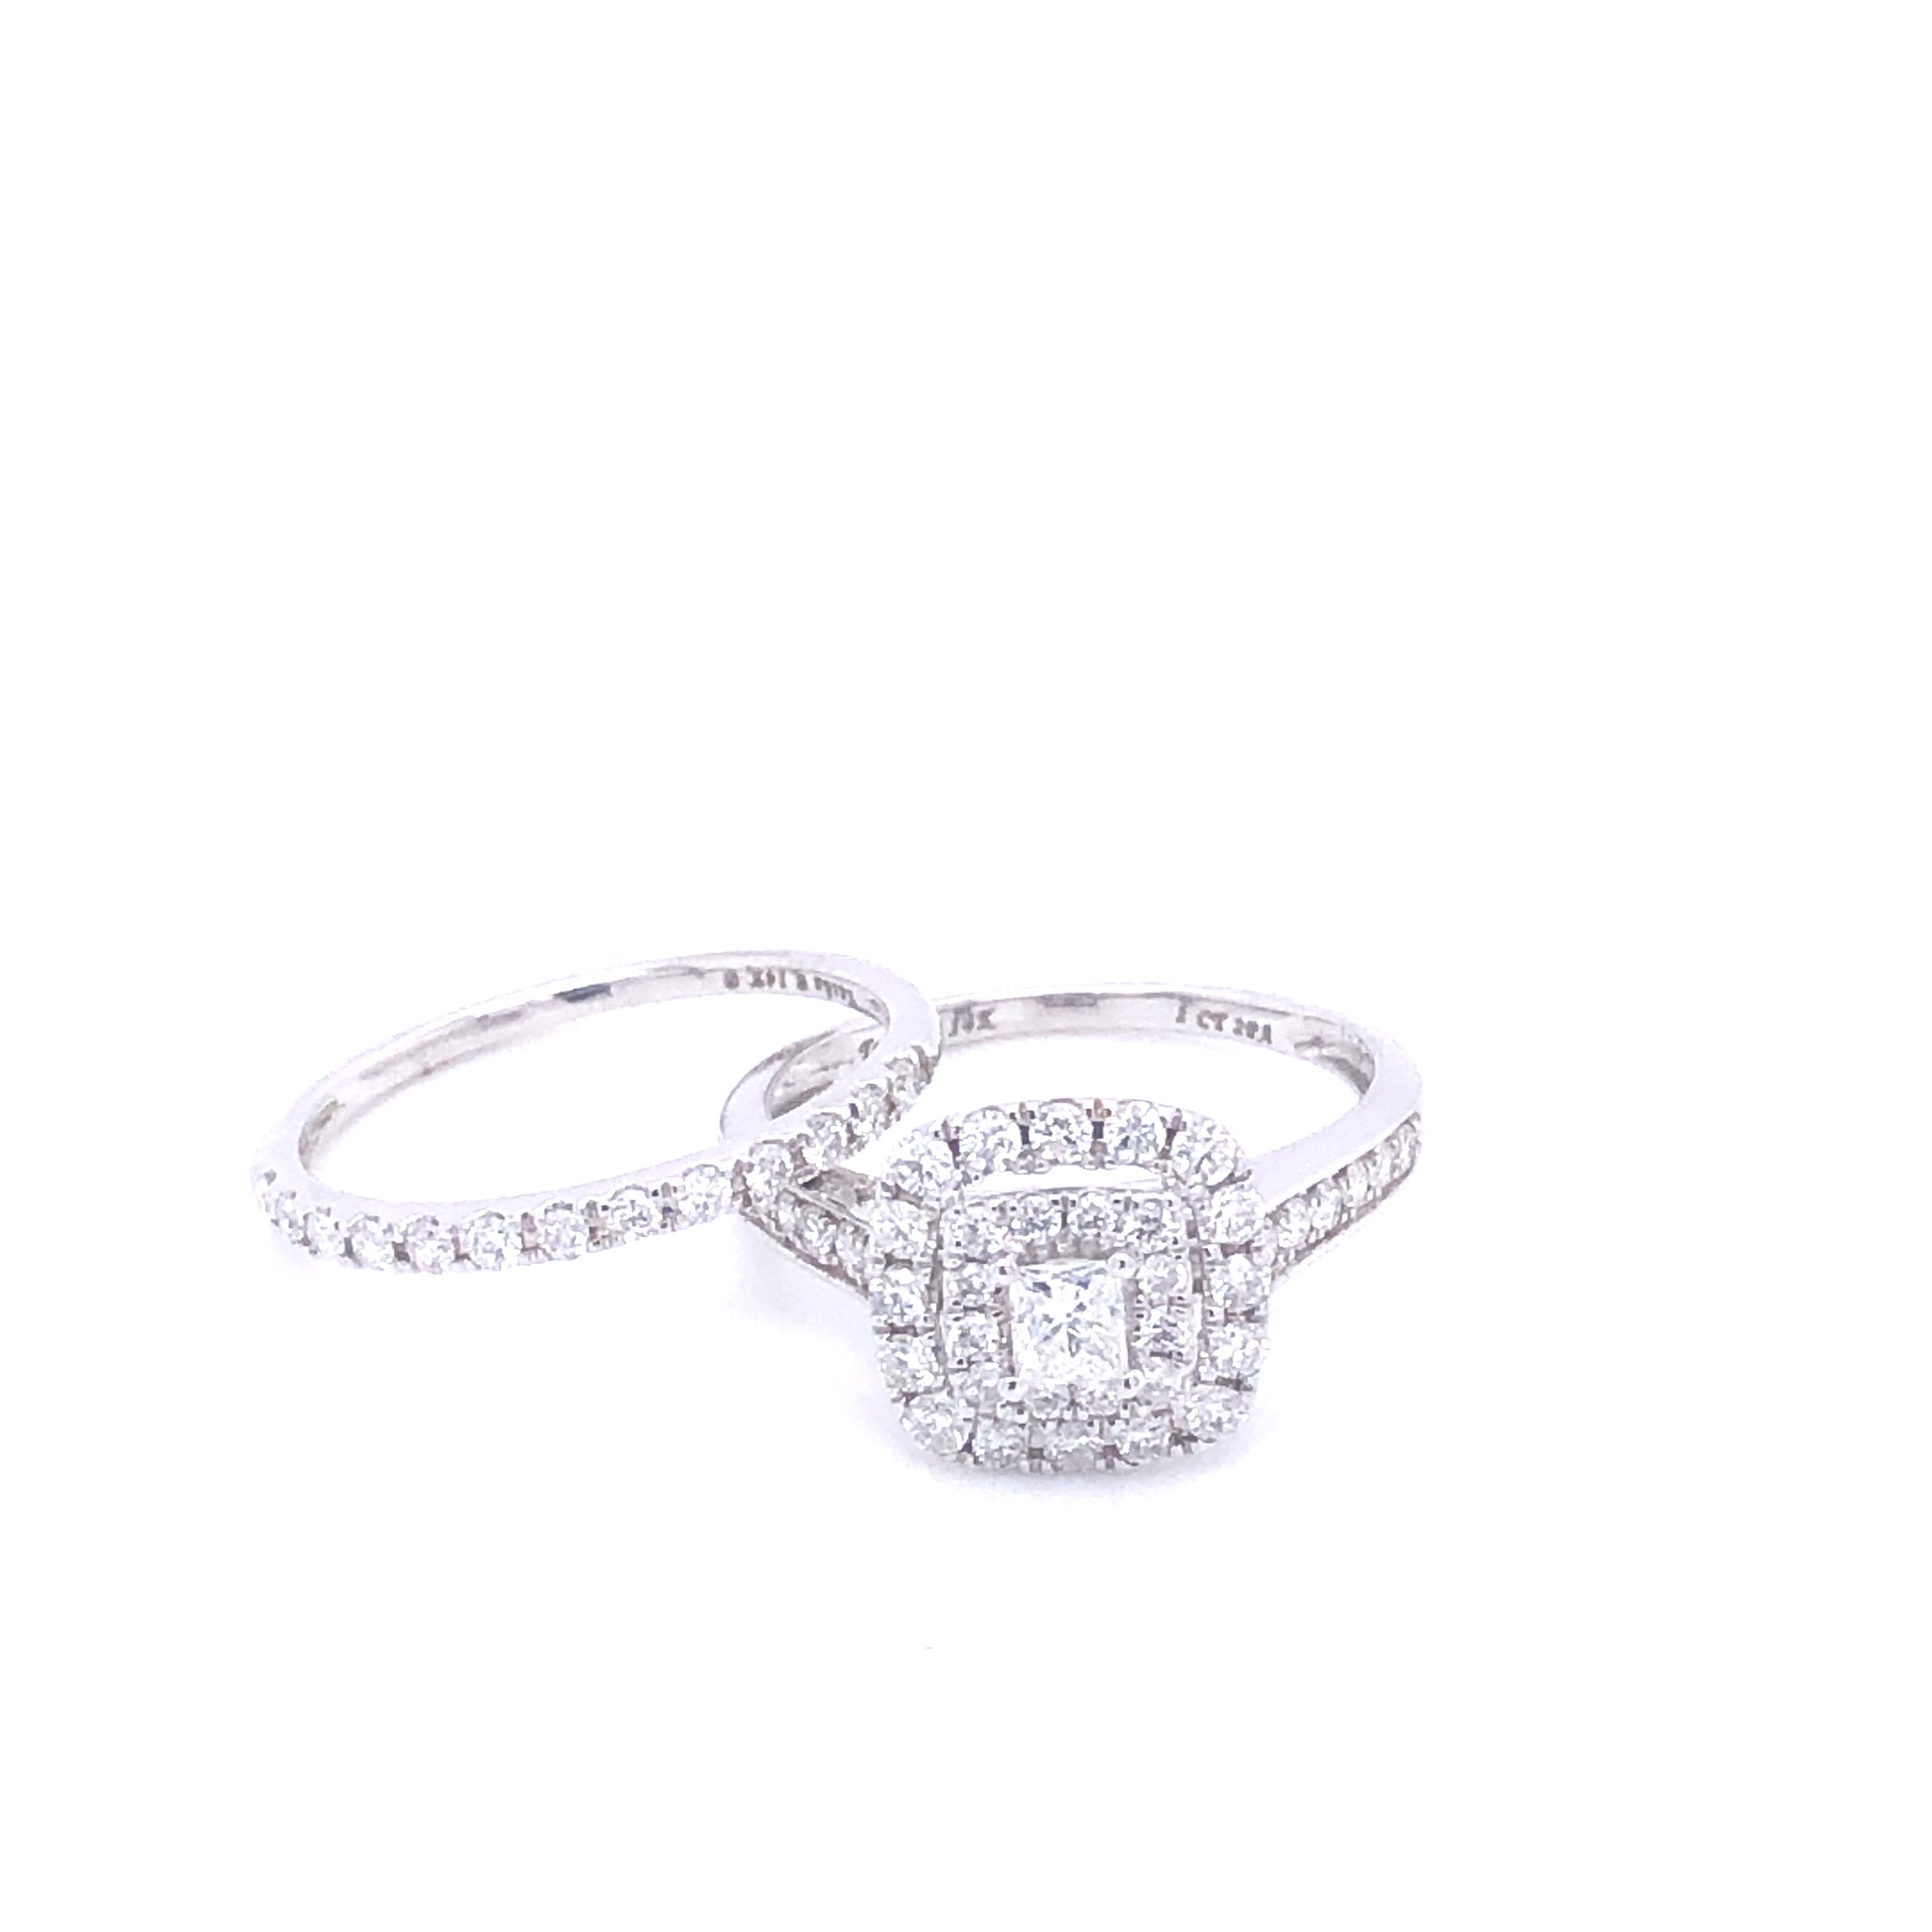 Square-Shaped Princess Cut Diamond White Gold Engagement Set | Luby Diamond Collection | Luby 